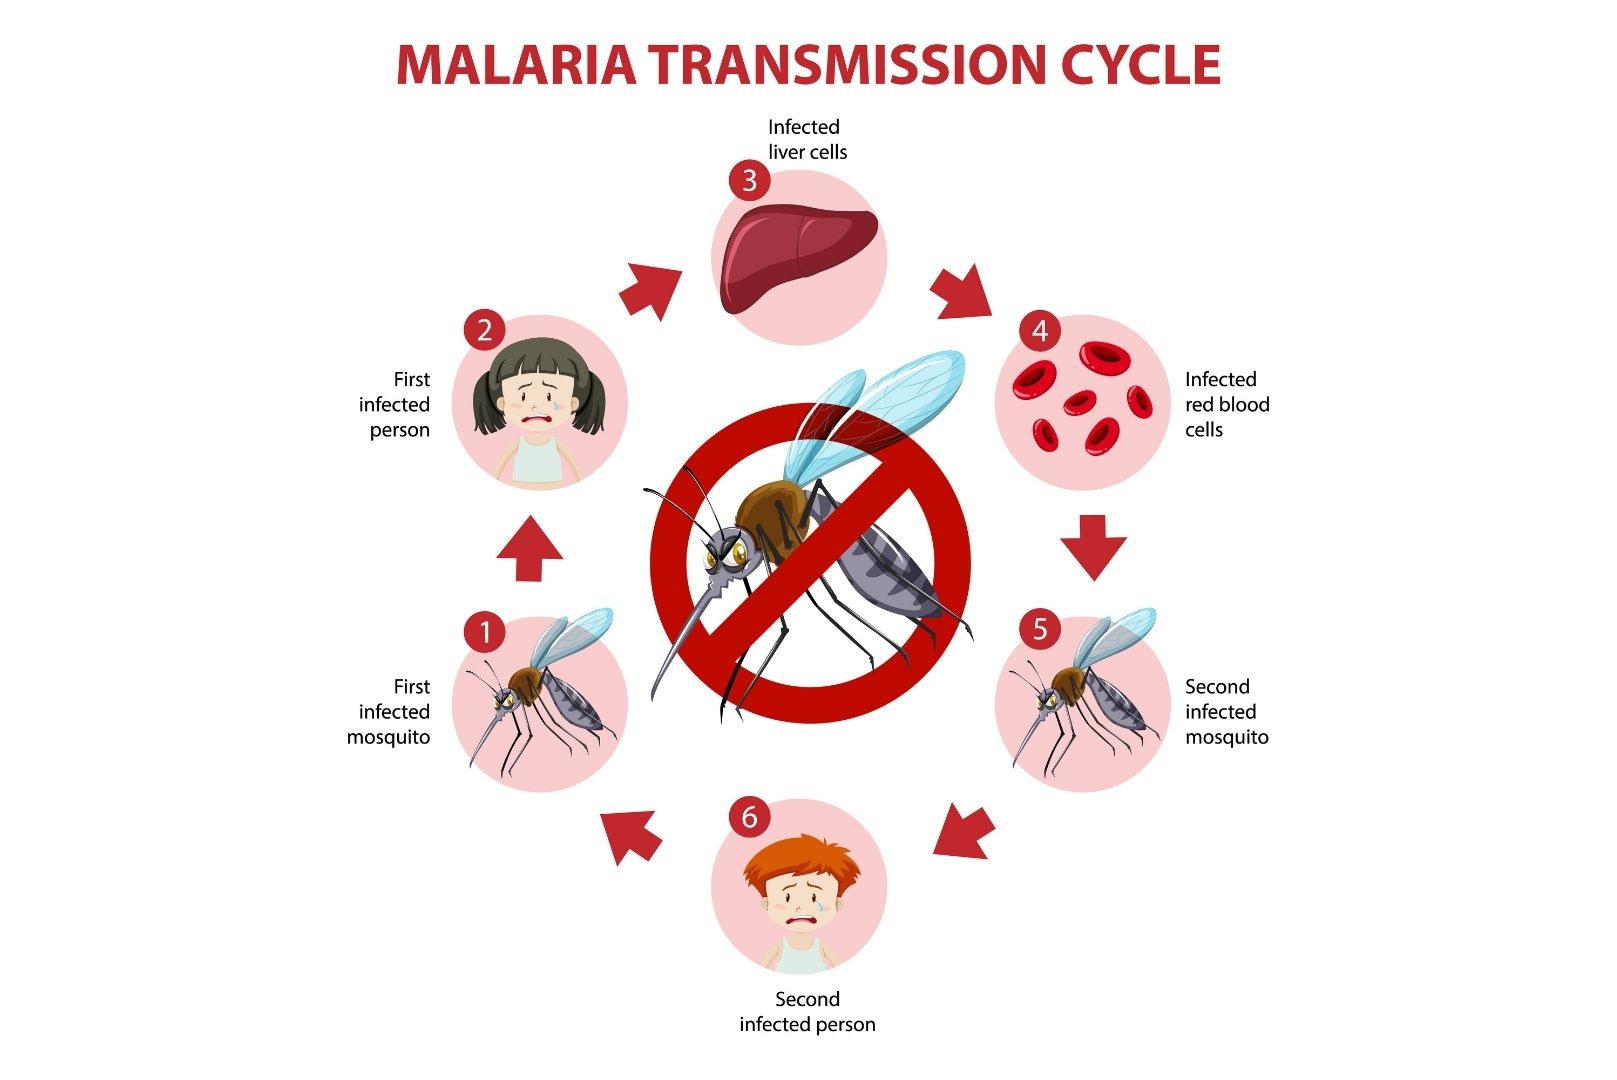 malaria cause and effect essay